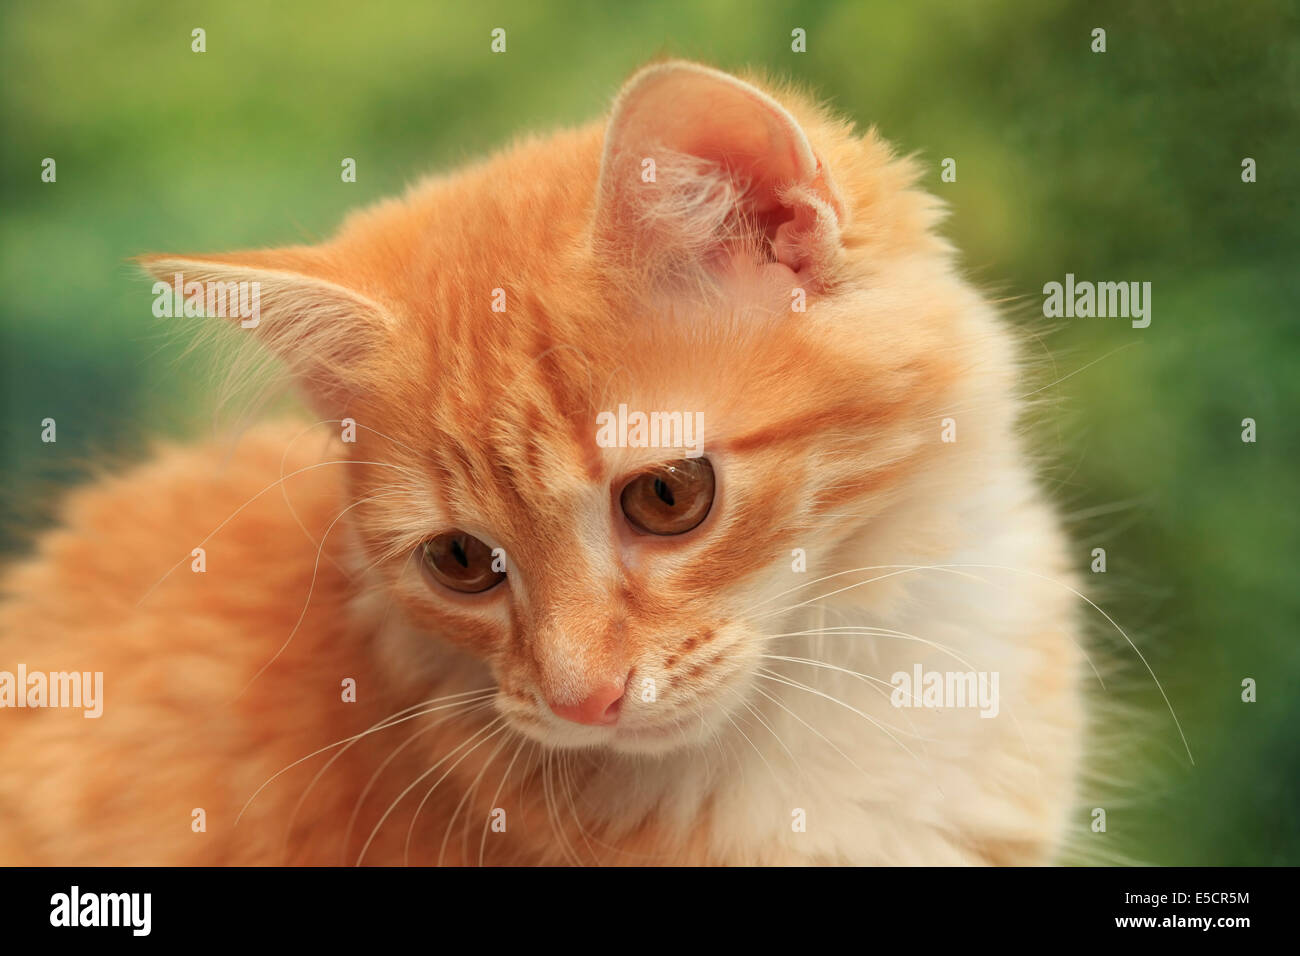 Portrait of a young red-haired cats Stock Photo